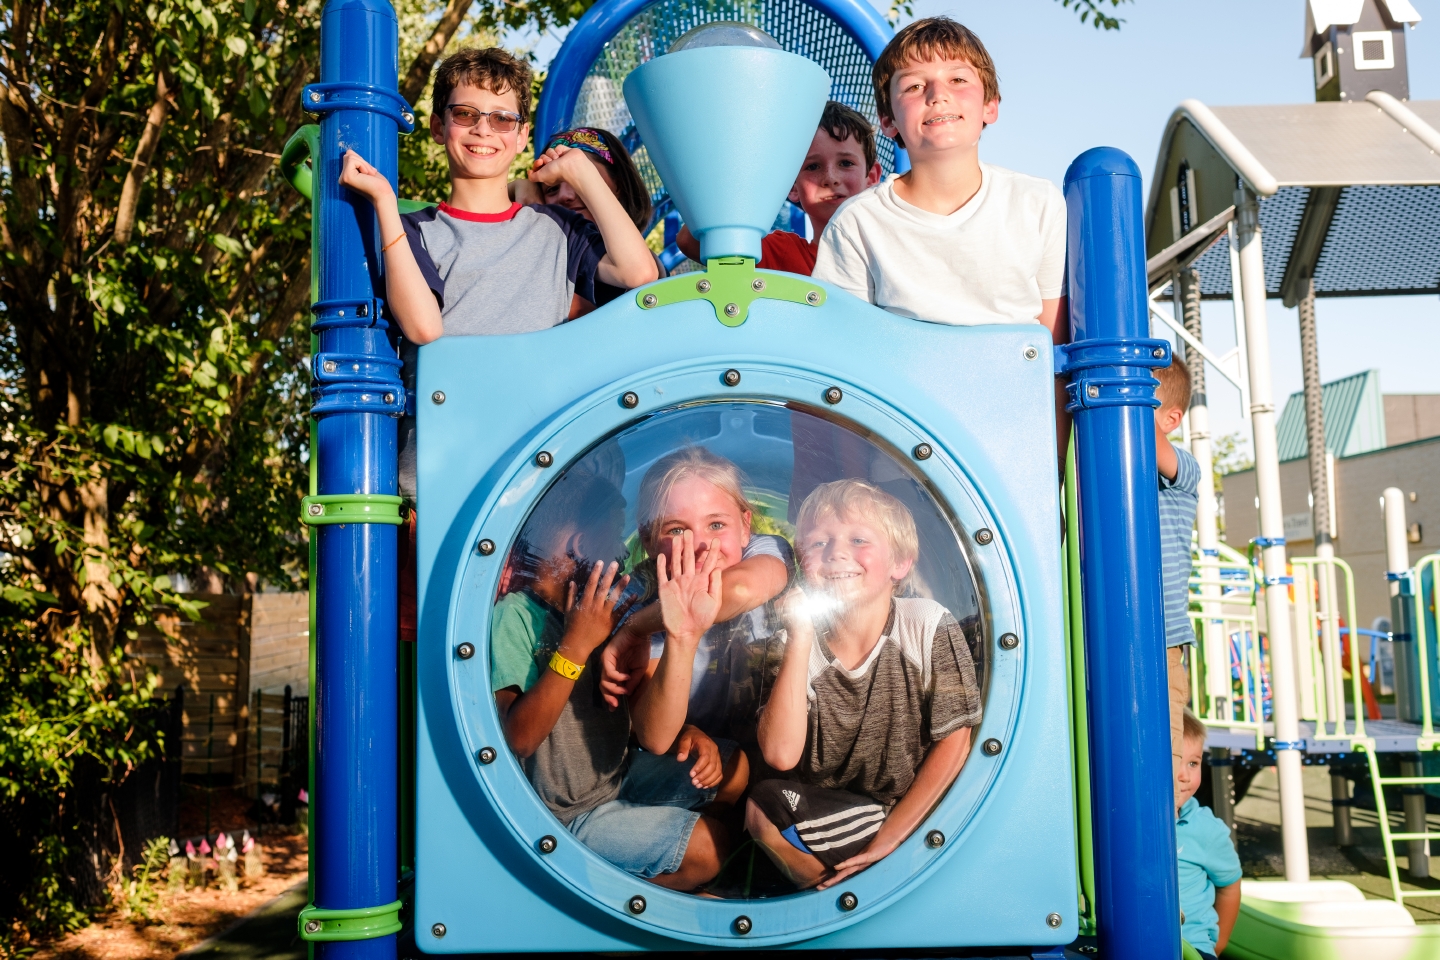 children posing for picture on playground equipment